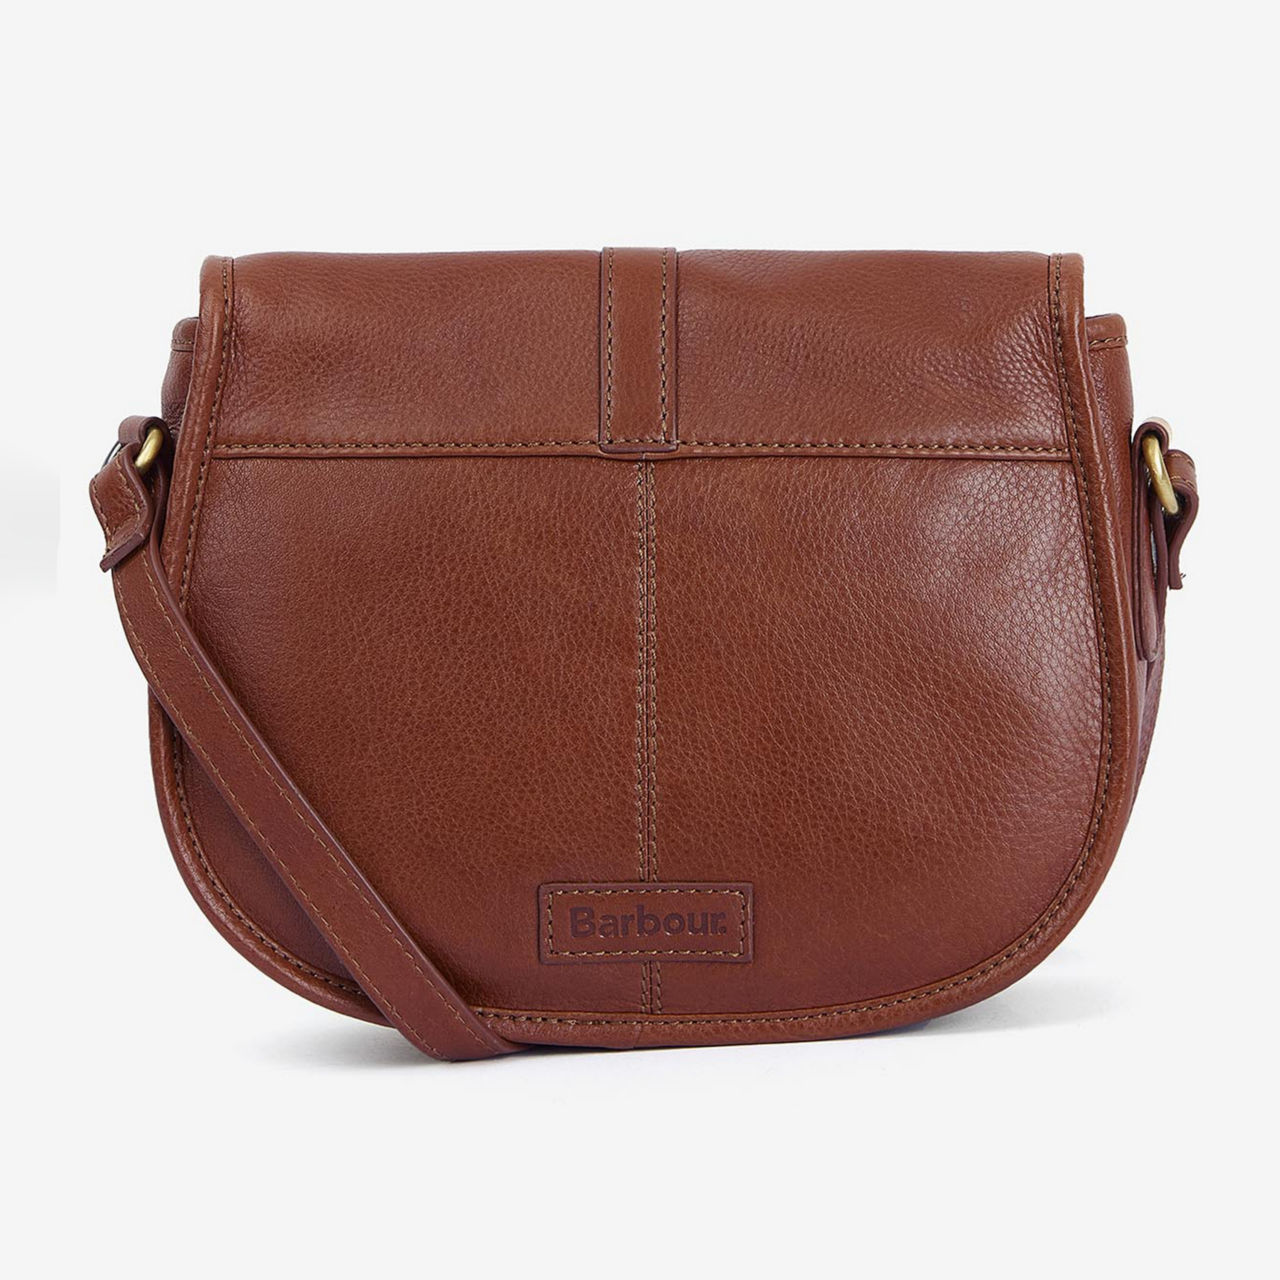 Barbour® Laire Medium Leather Saddle Bag - BROWN image number 1